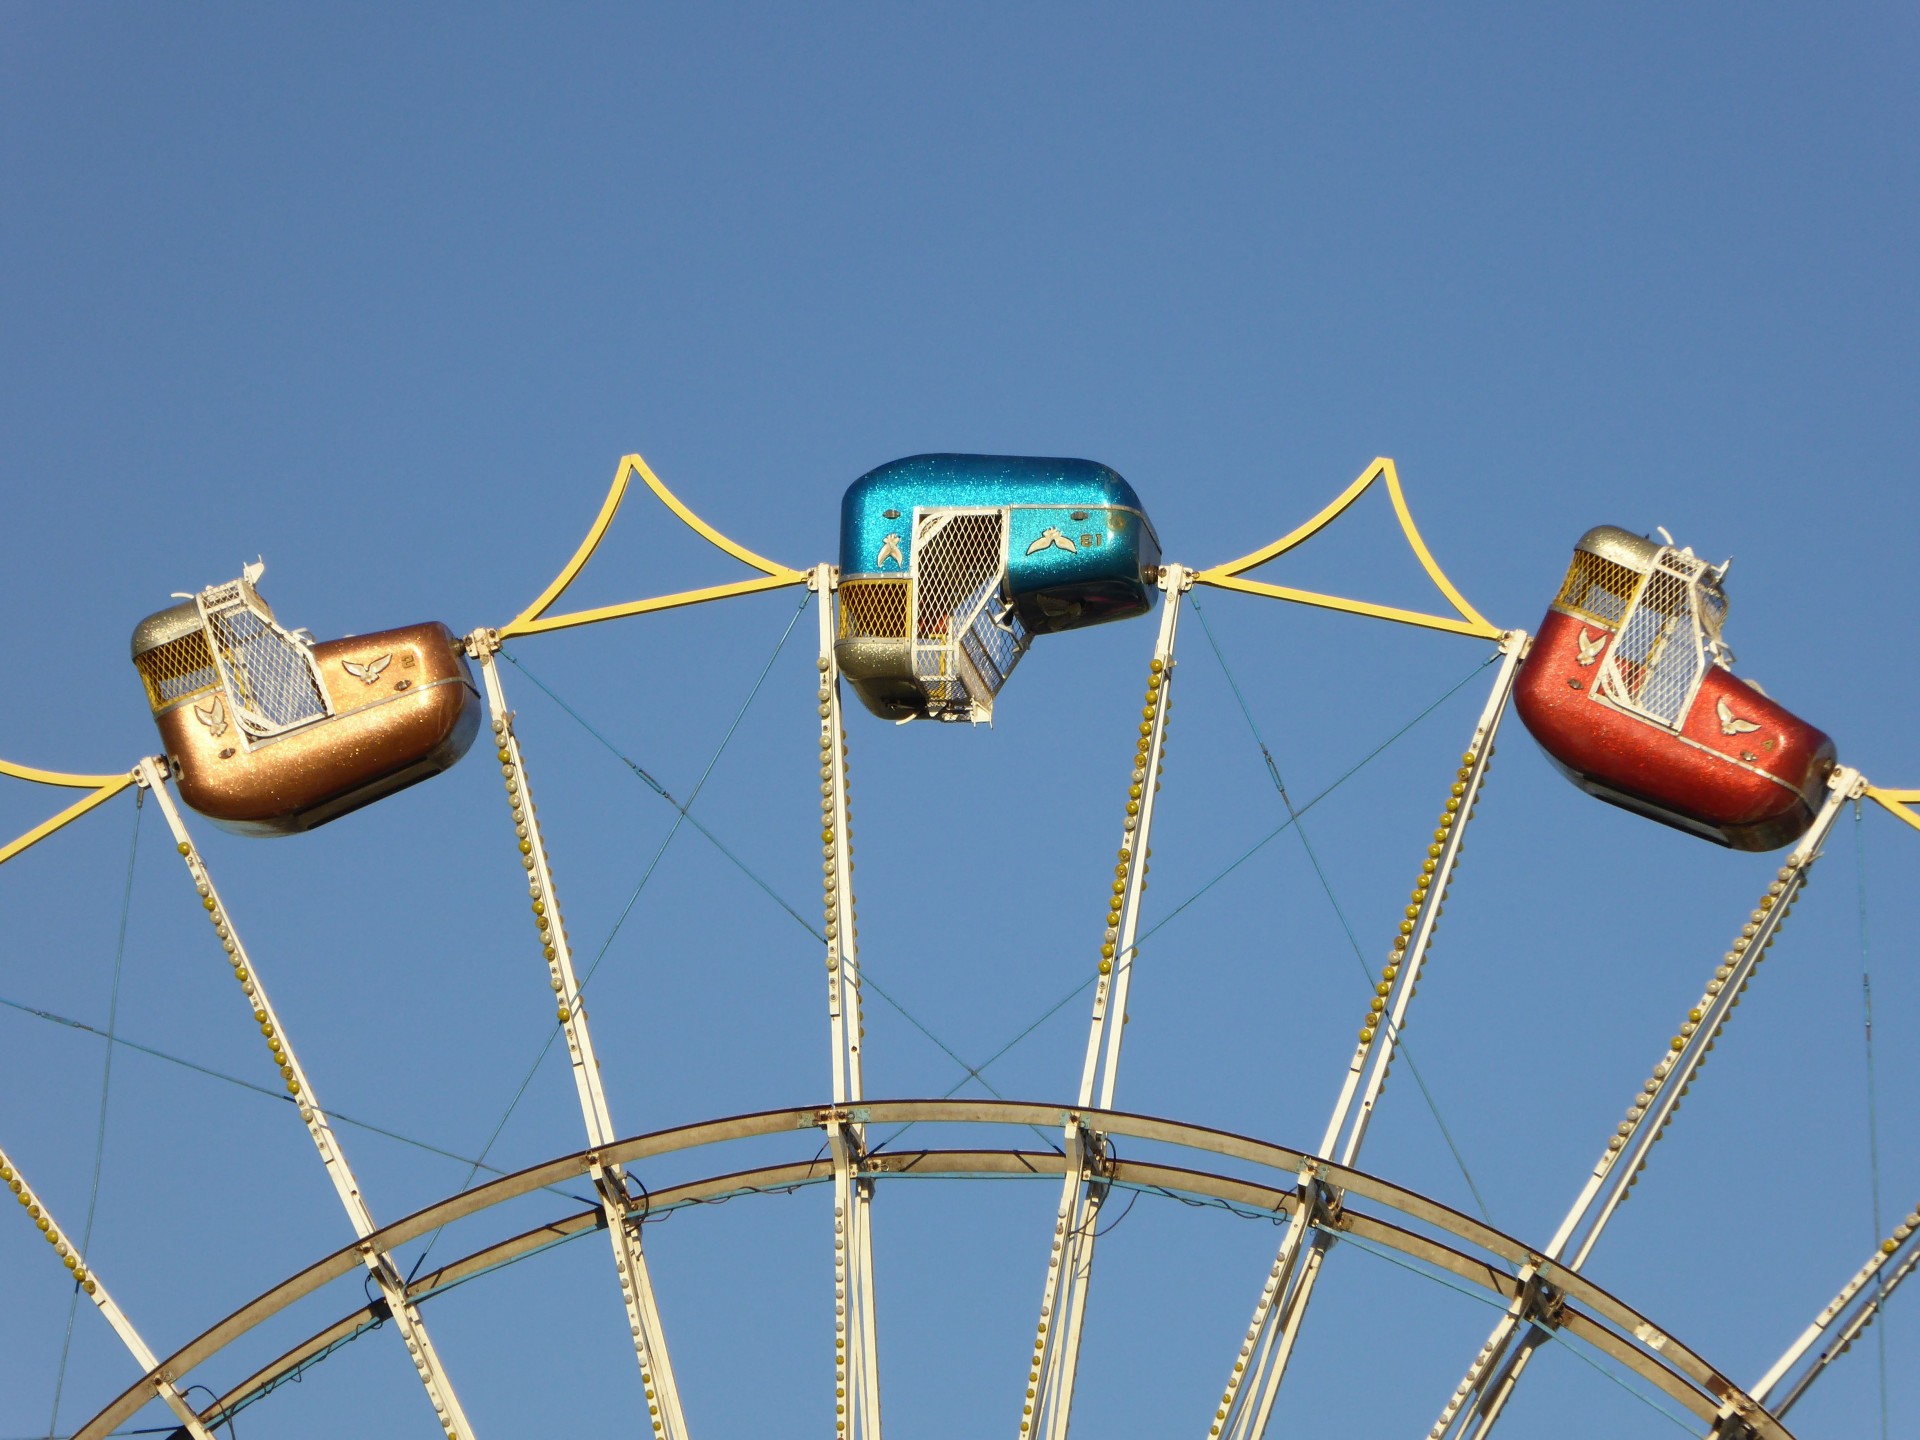 Metaphor for a bad day - a ferris wheel car upside down stuck at the top of a ferris wheel